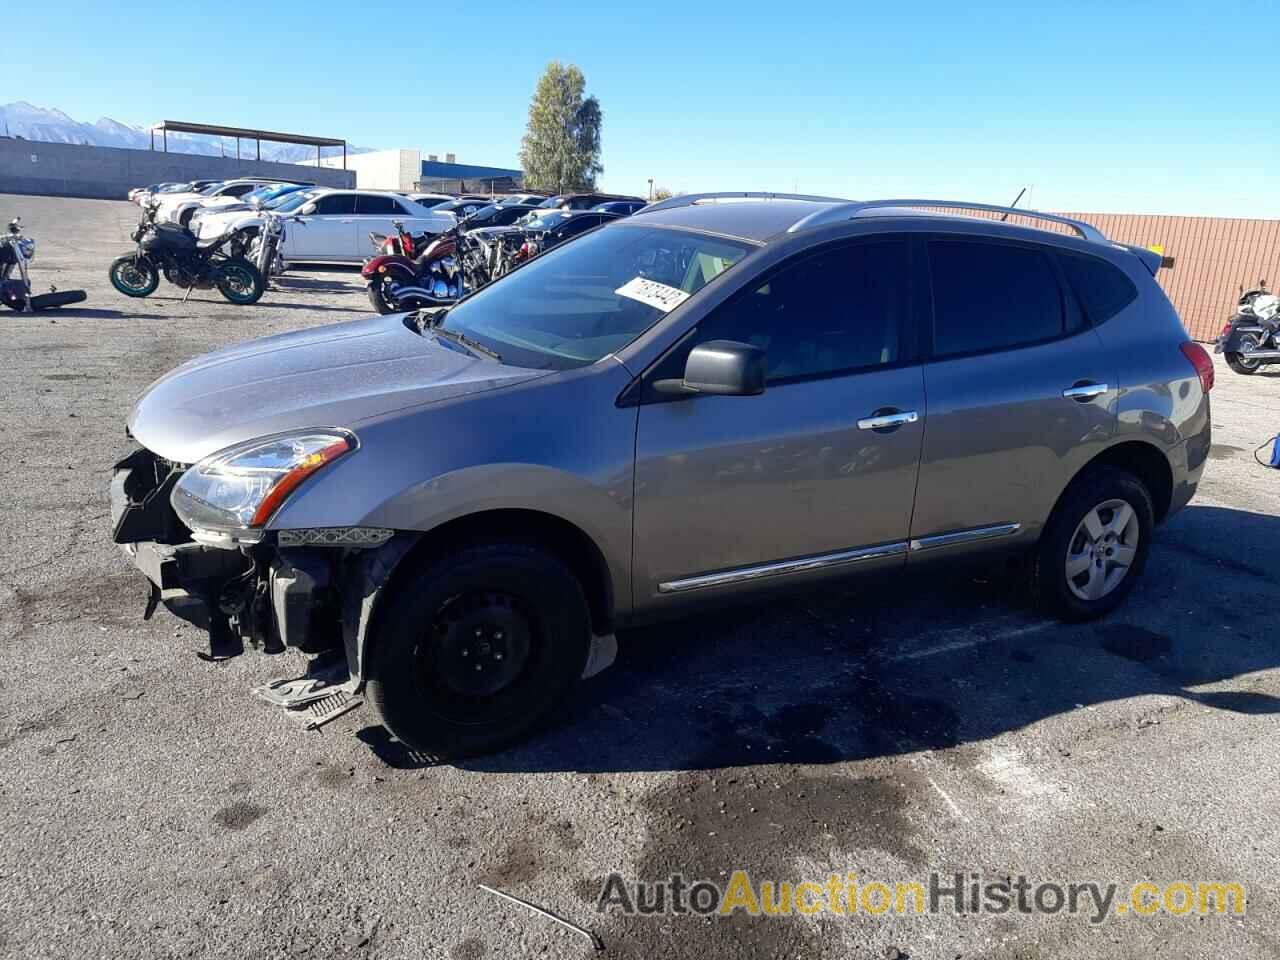 2015 NISSAN ROGUE S, JN8AS5MT2FW159953